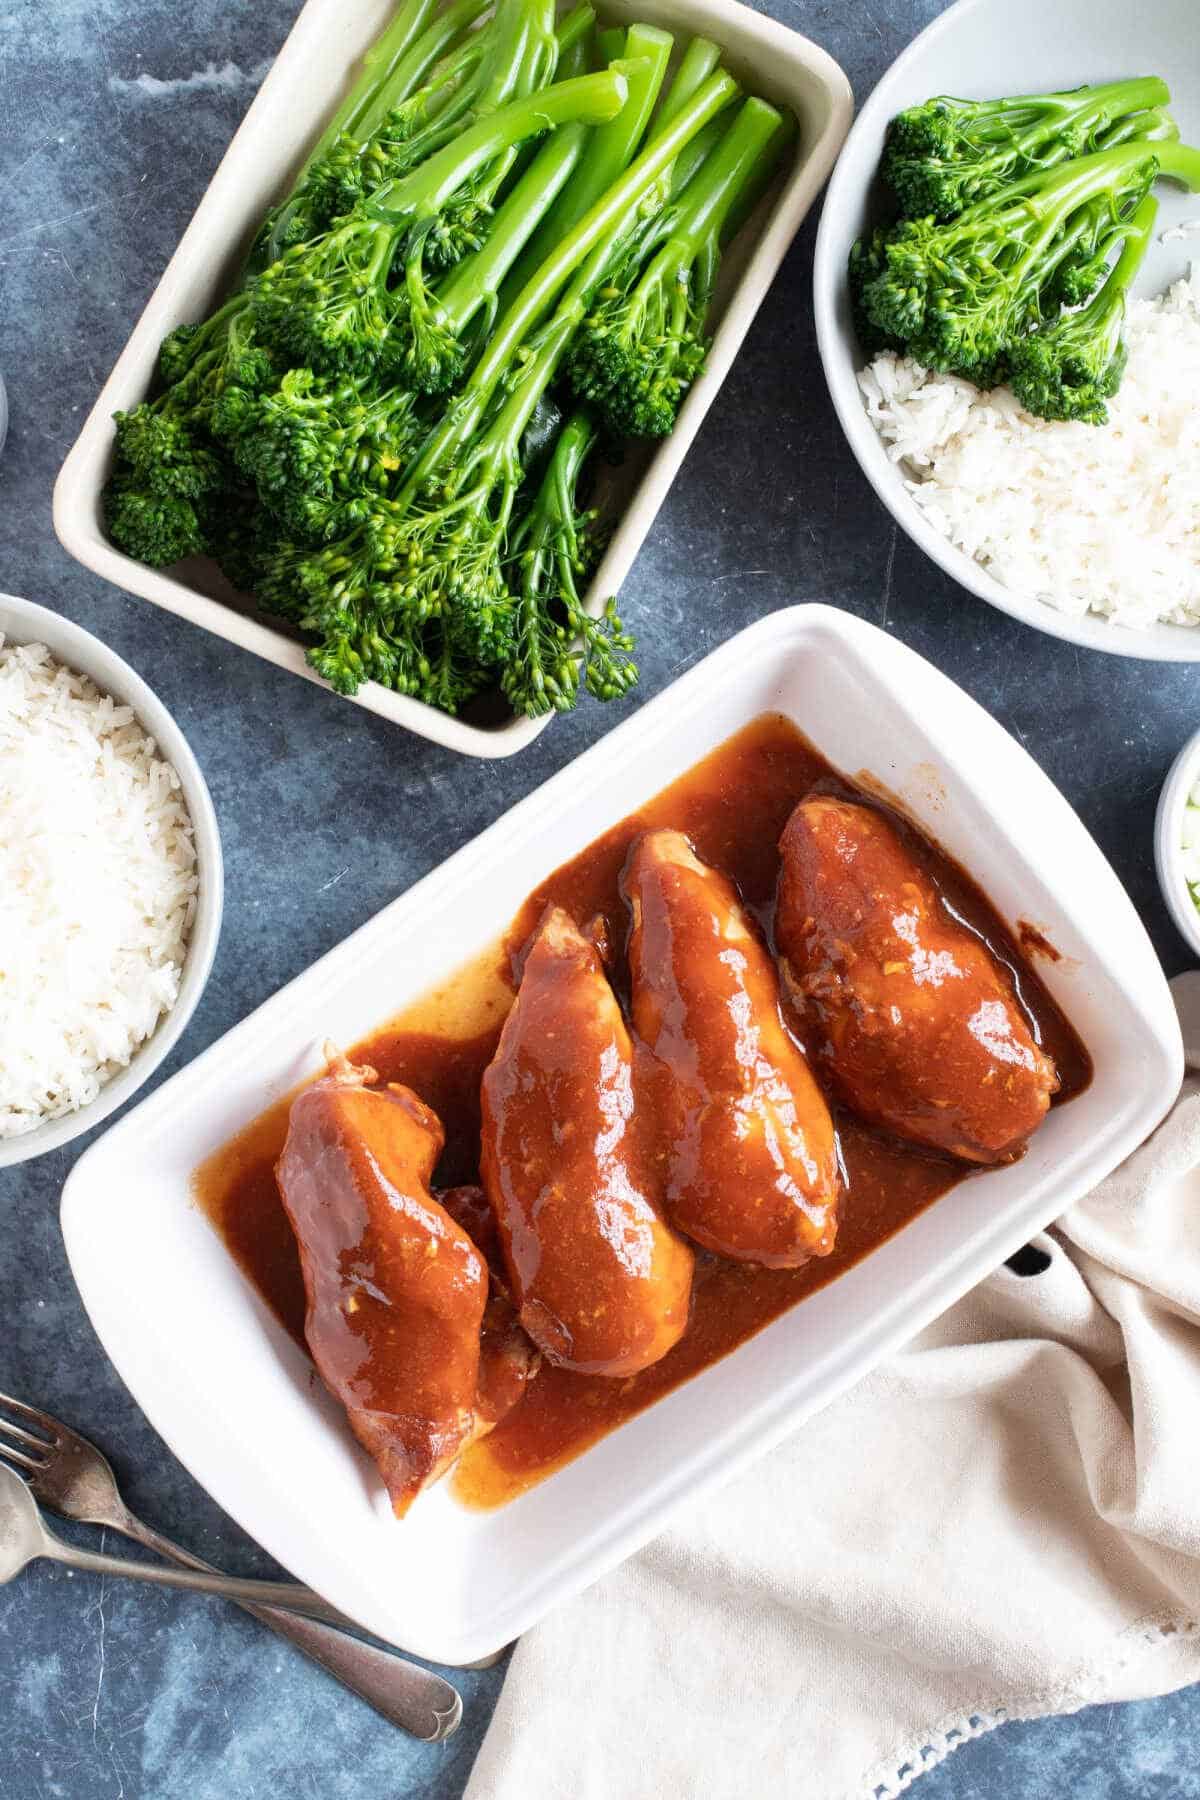 SLow cooker diet coke chicken in a white serving dish with rice and broccoli sides.